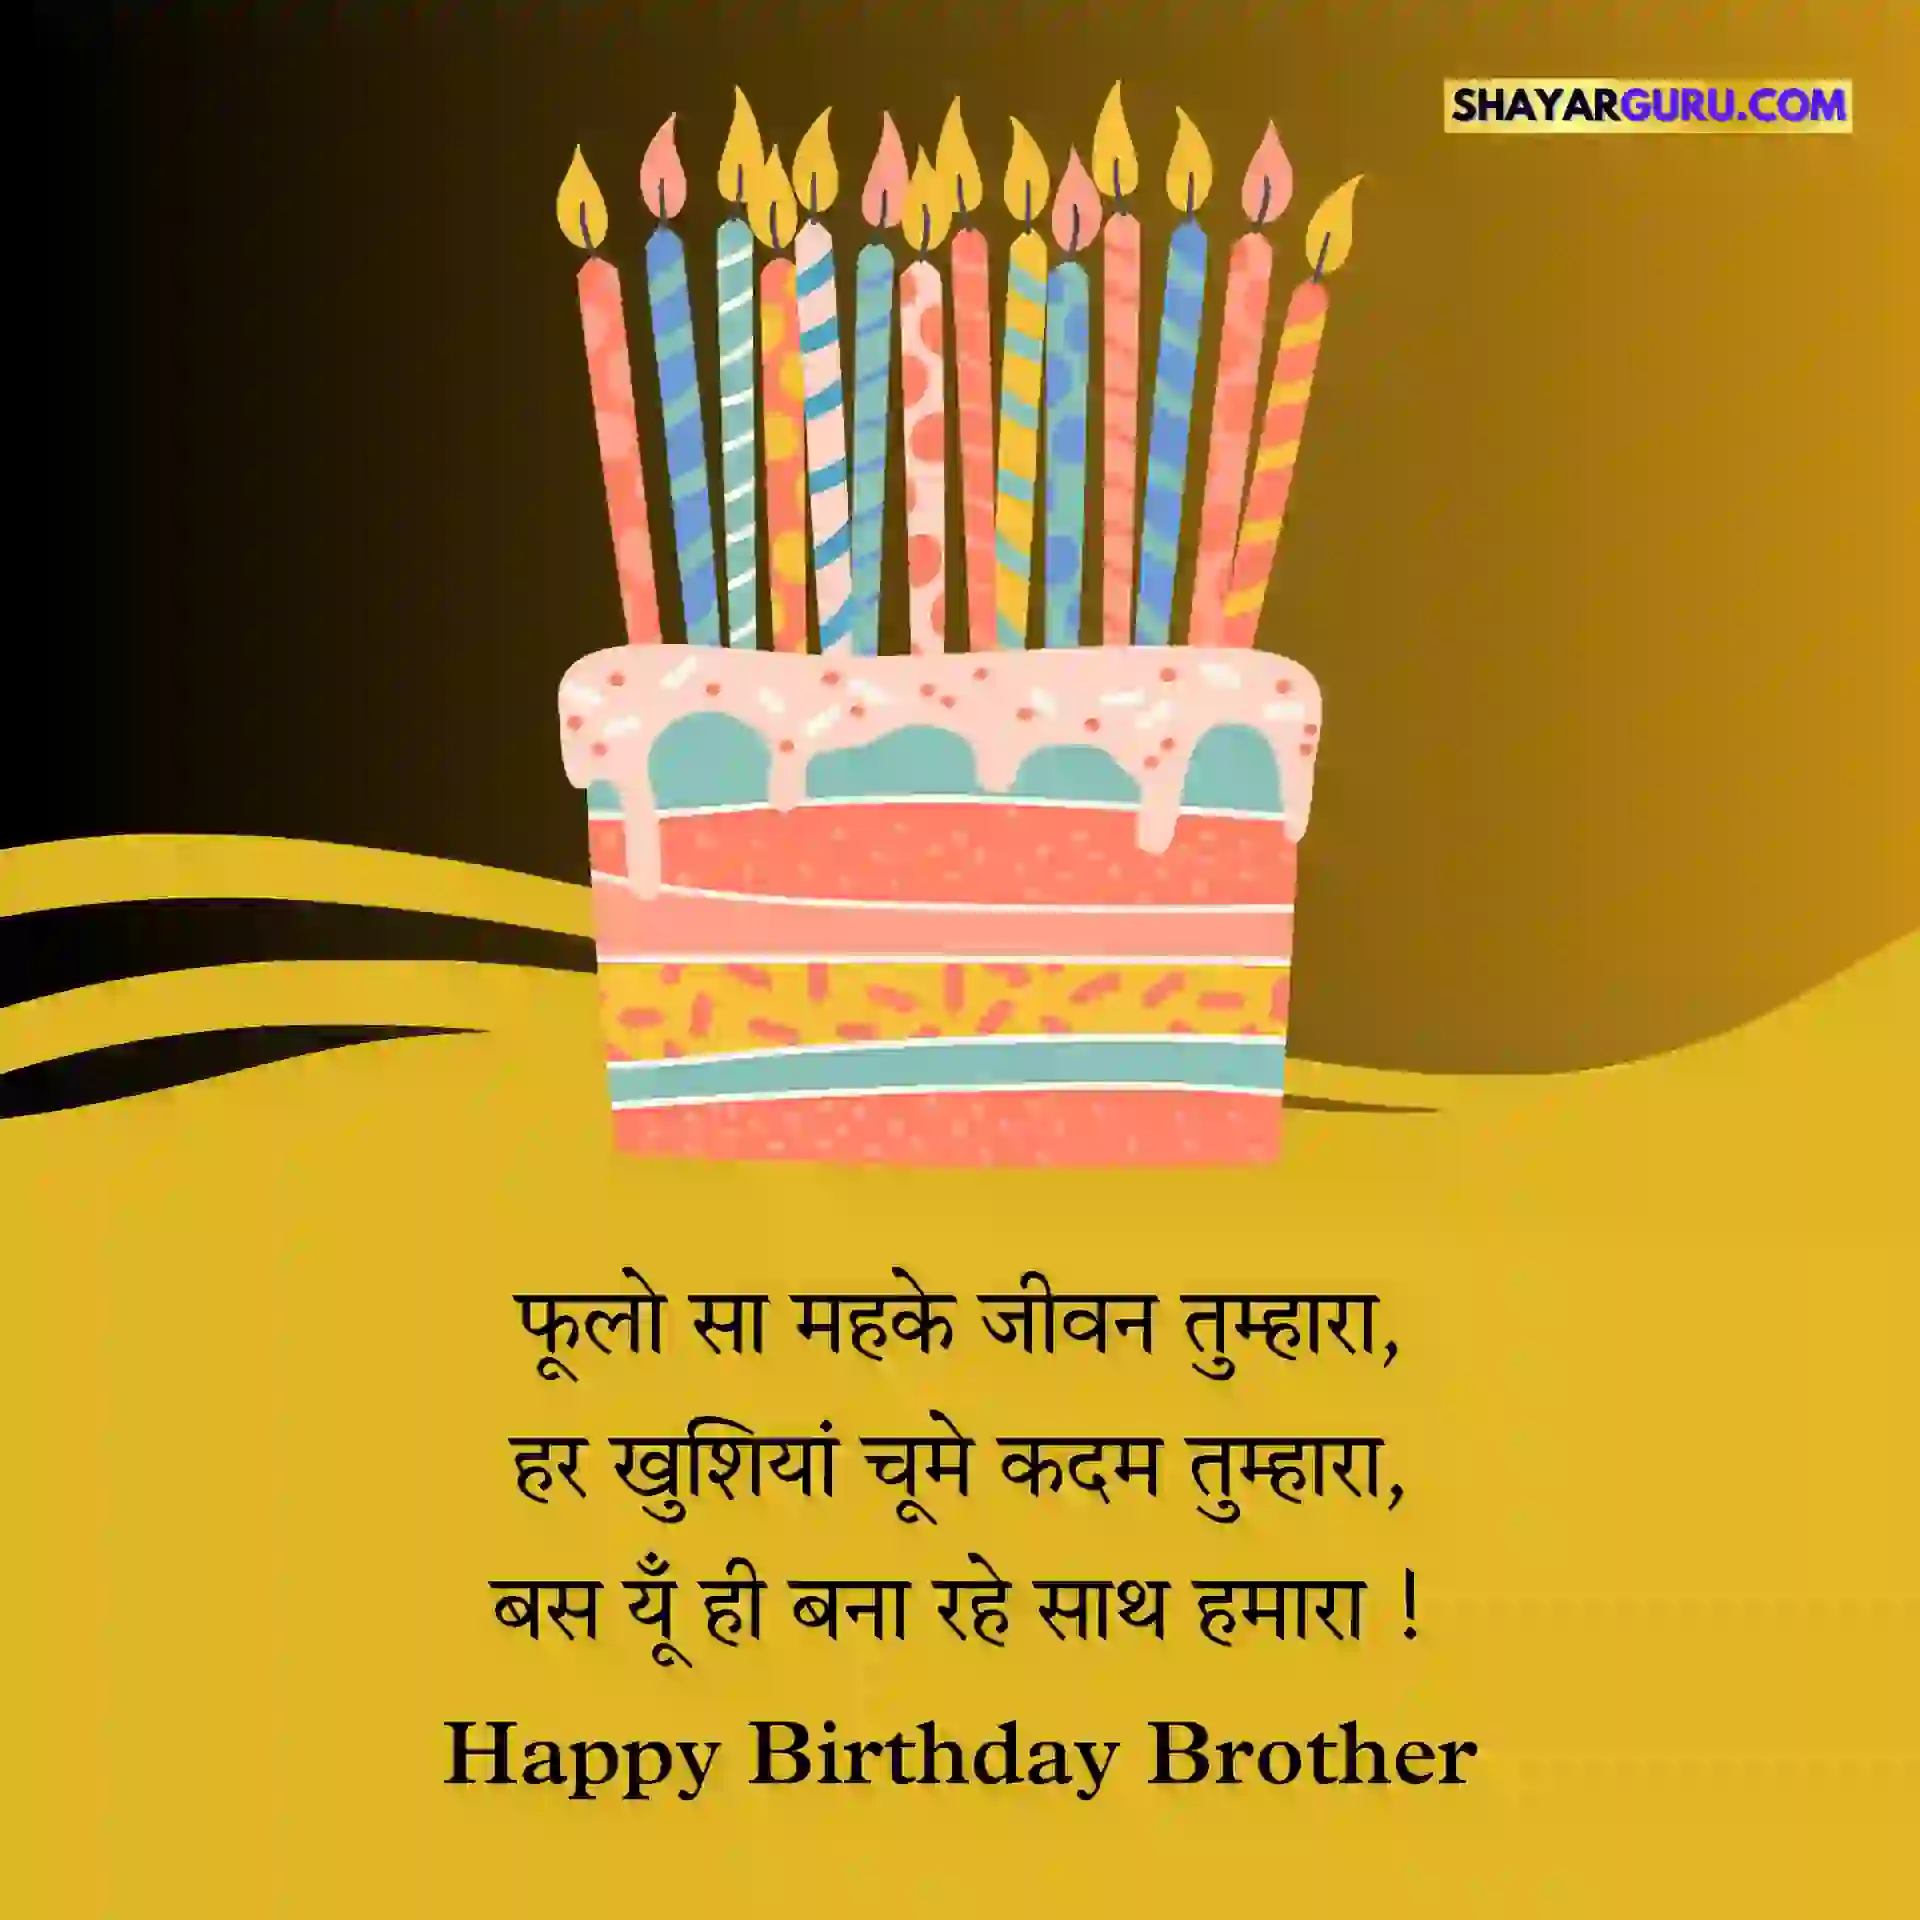 Birthday Wishes in Hindi for Brother Image